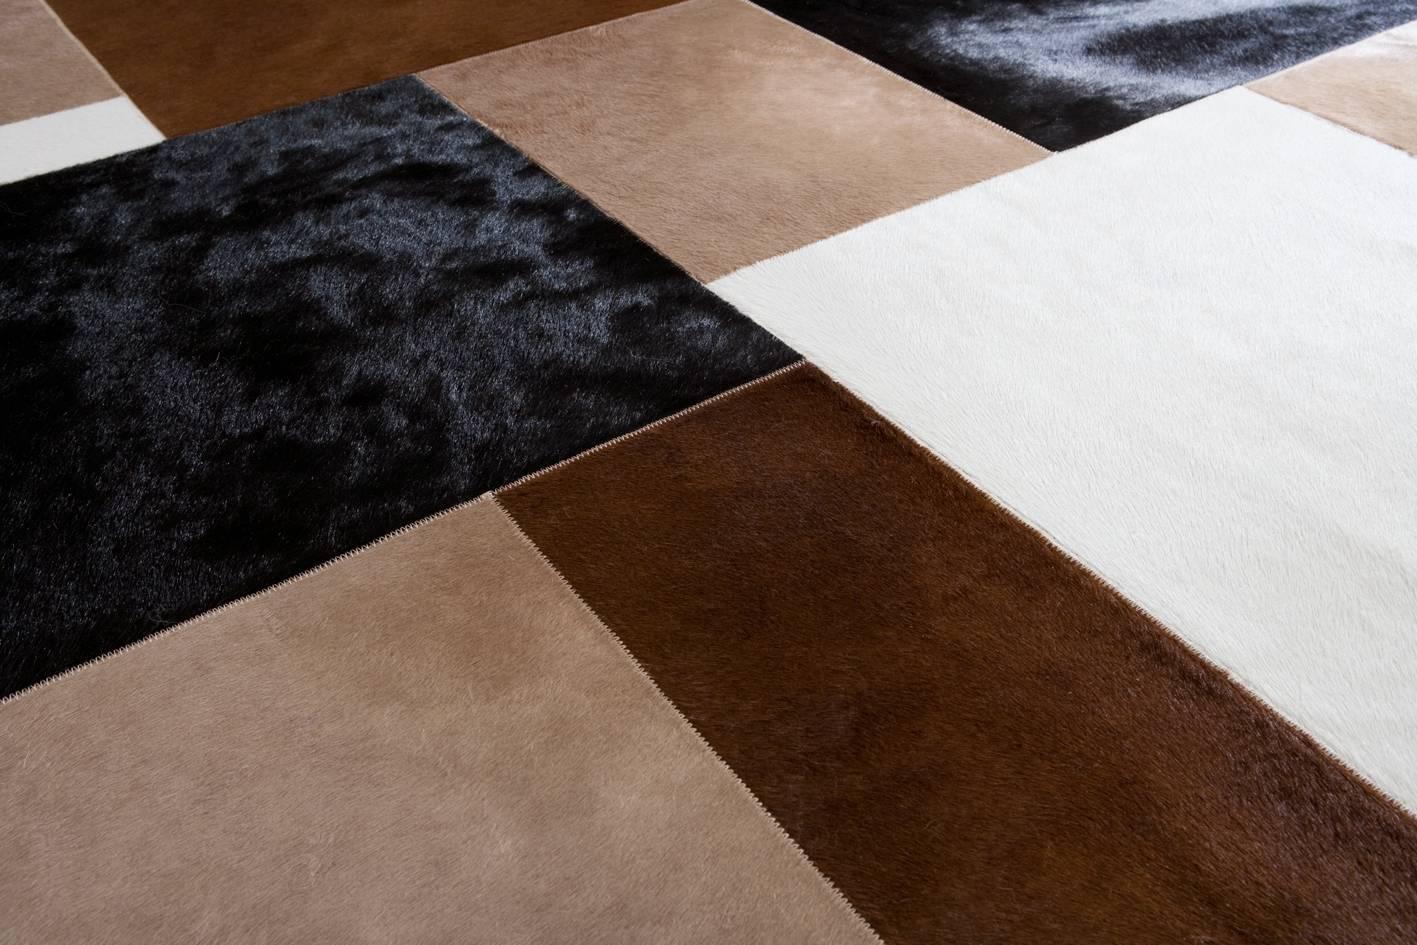 Handmade in France by Norki.
French cowhide hand-stitched in France, synthetic lining
Size: 220 x 240 cm.
   